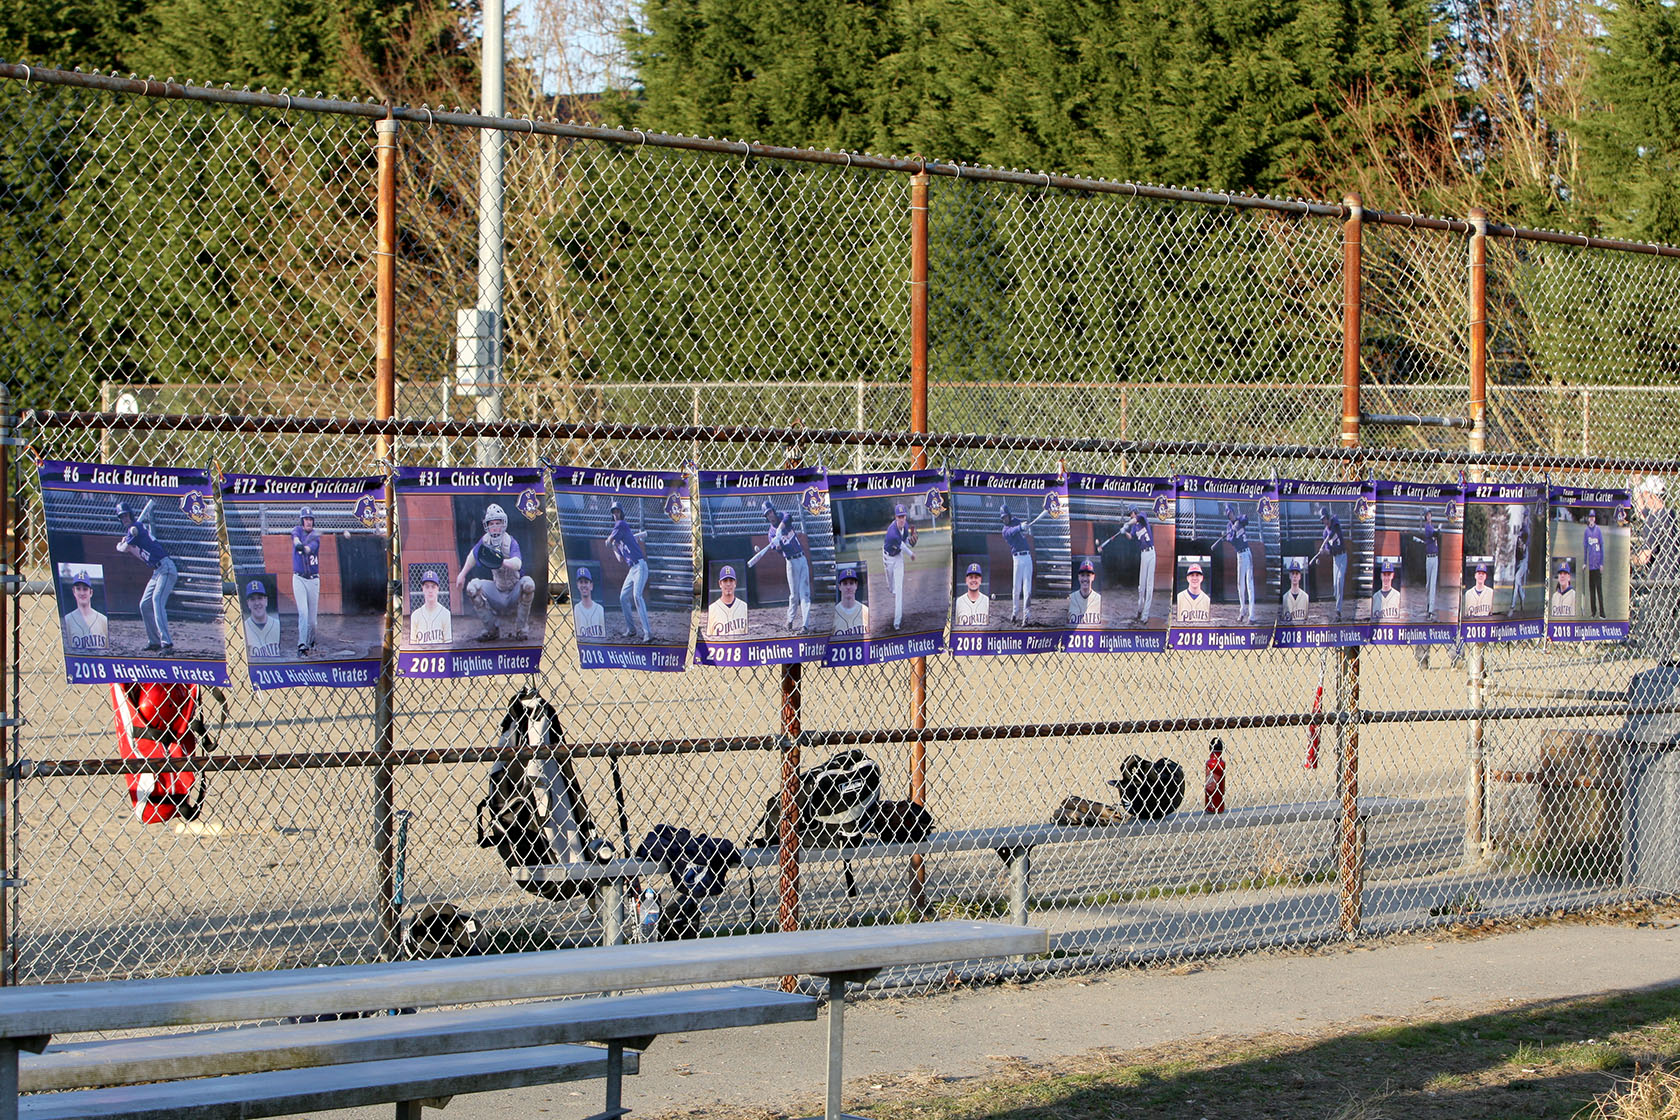 Posters of the Highline's seniors were hung for everyone to enjoy.